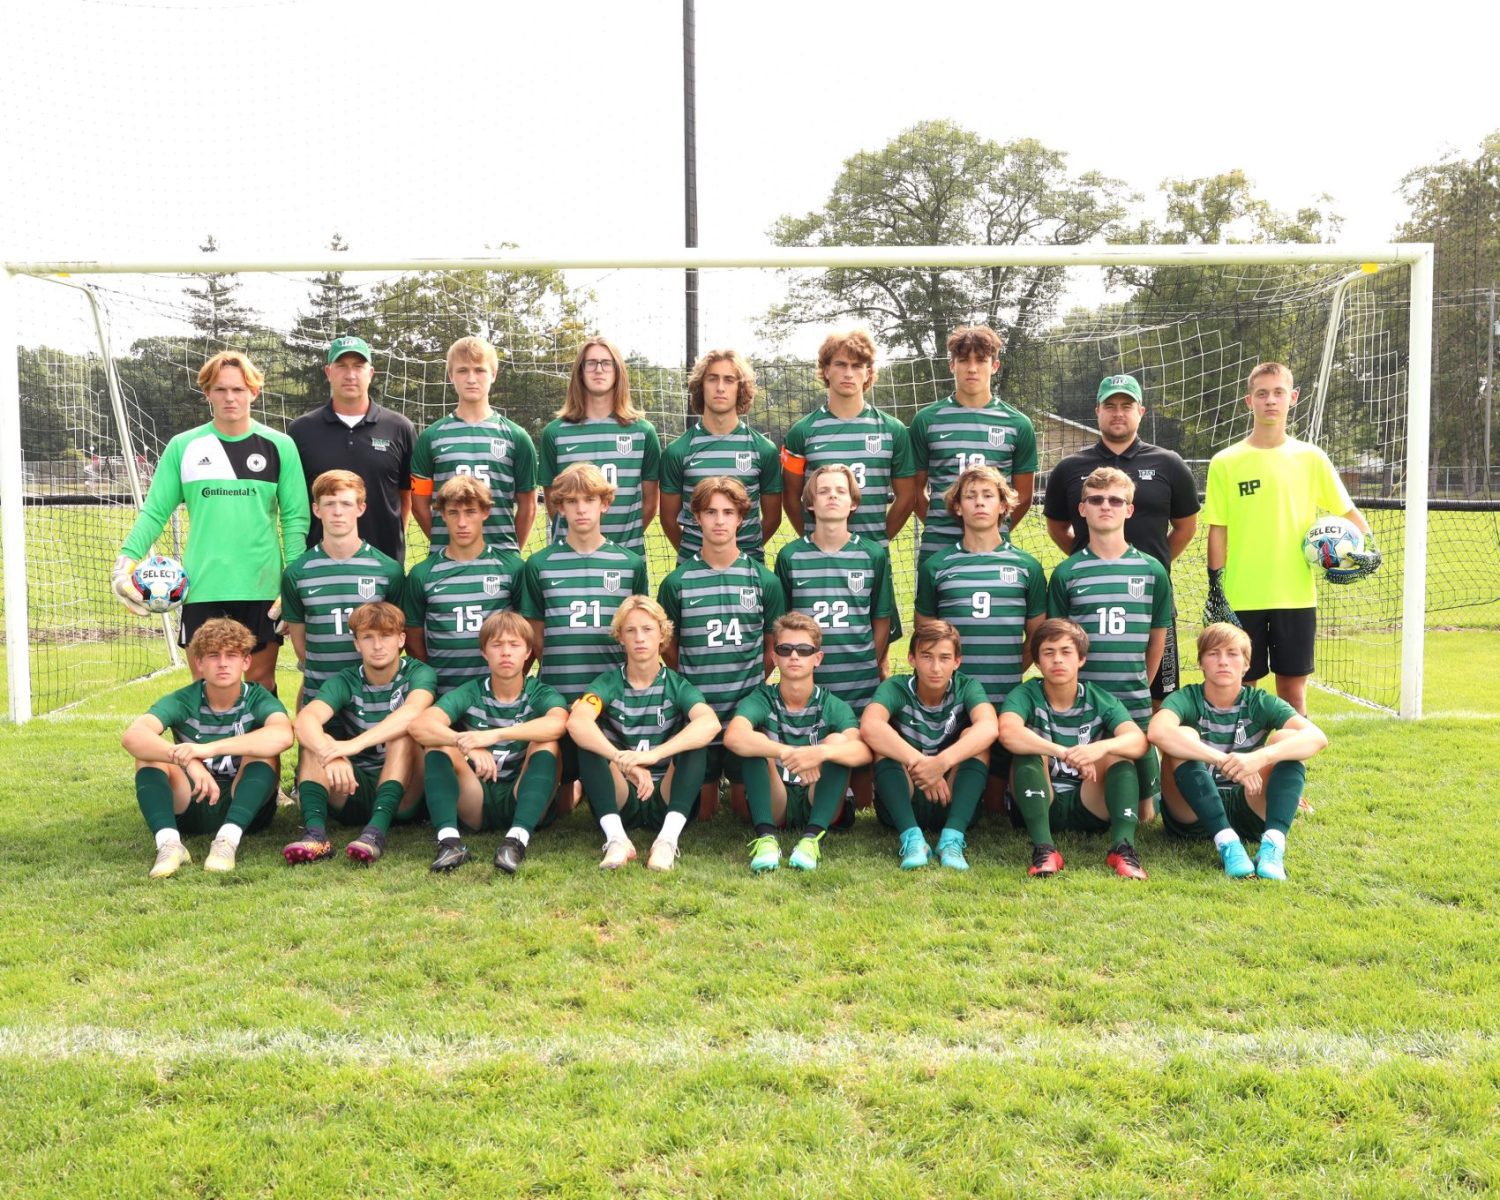 Reeths-Puffer soccer season comes to an end with 3-0 loss